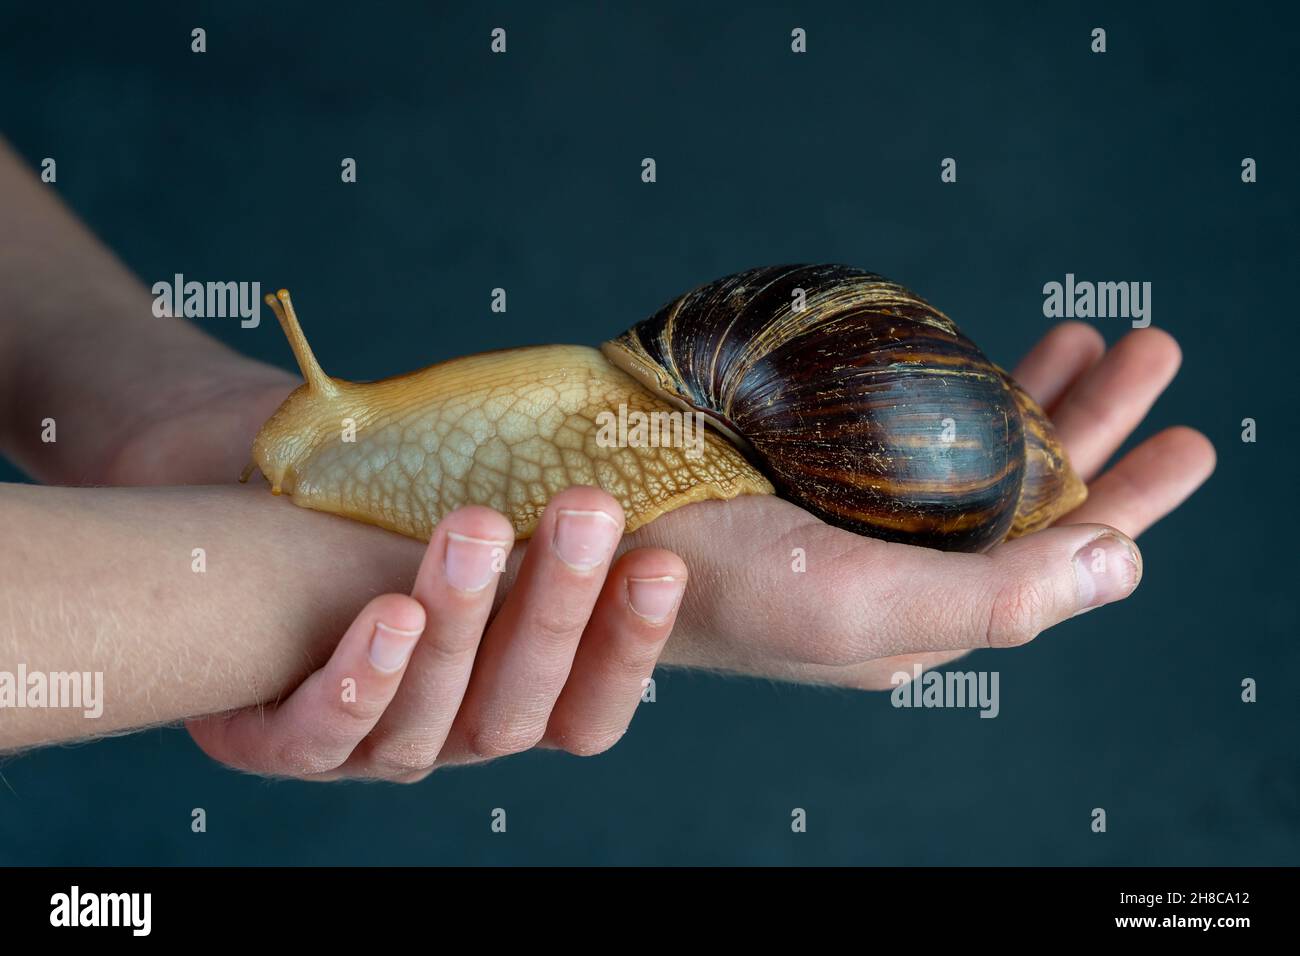 Snail Sutra: Unleash Your Inner Desires with the Giant African Land Snail